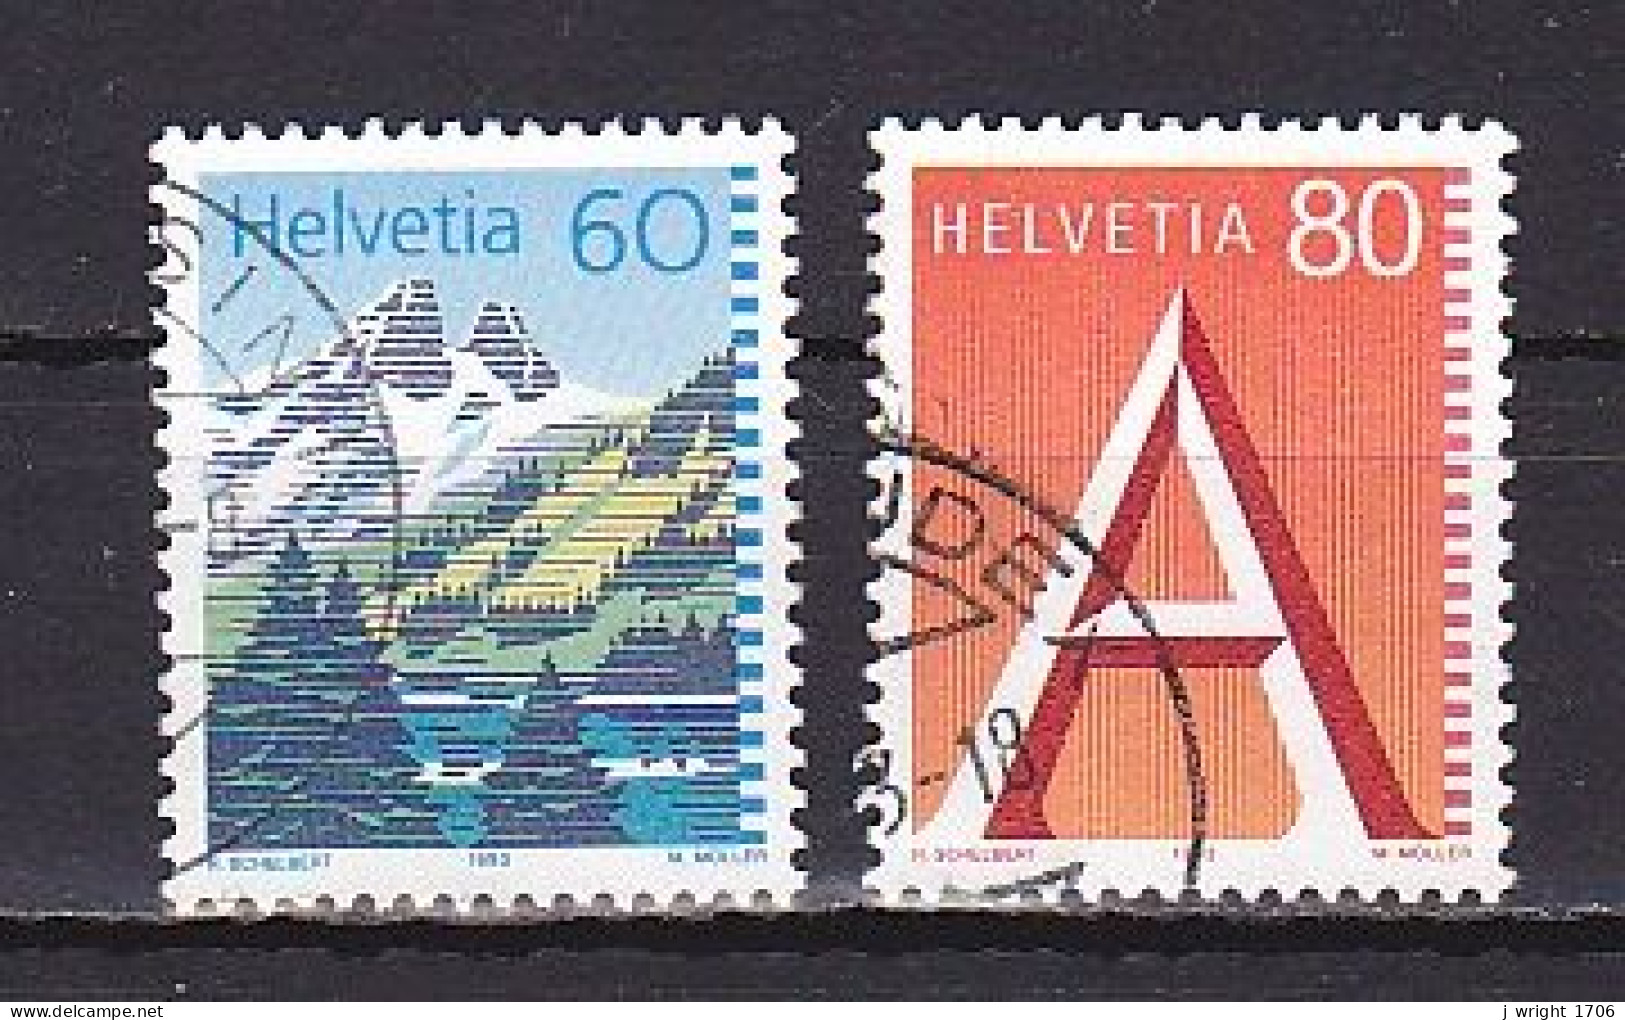 Switzerland, 1993, Lake Tanay & 'A' First Class Stamp, 60c & 80c, USED - Gebraucht